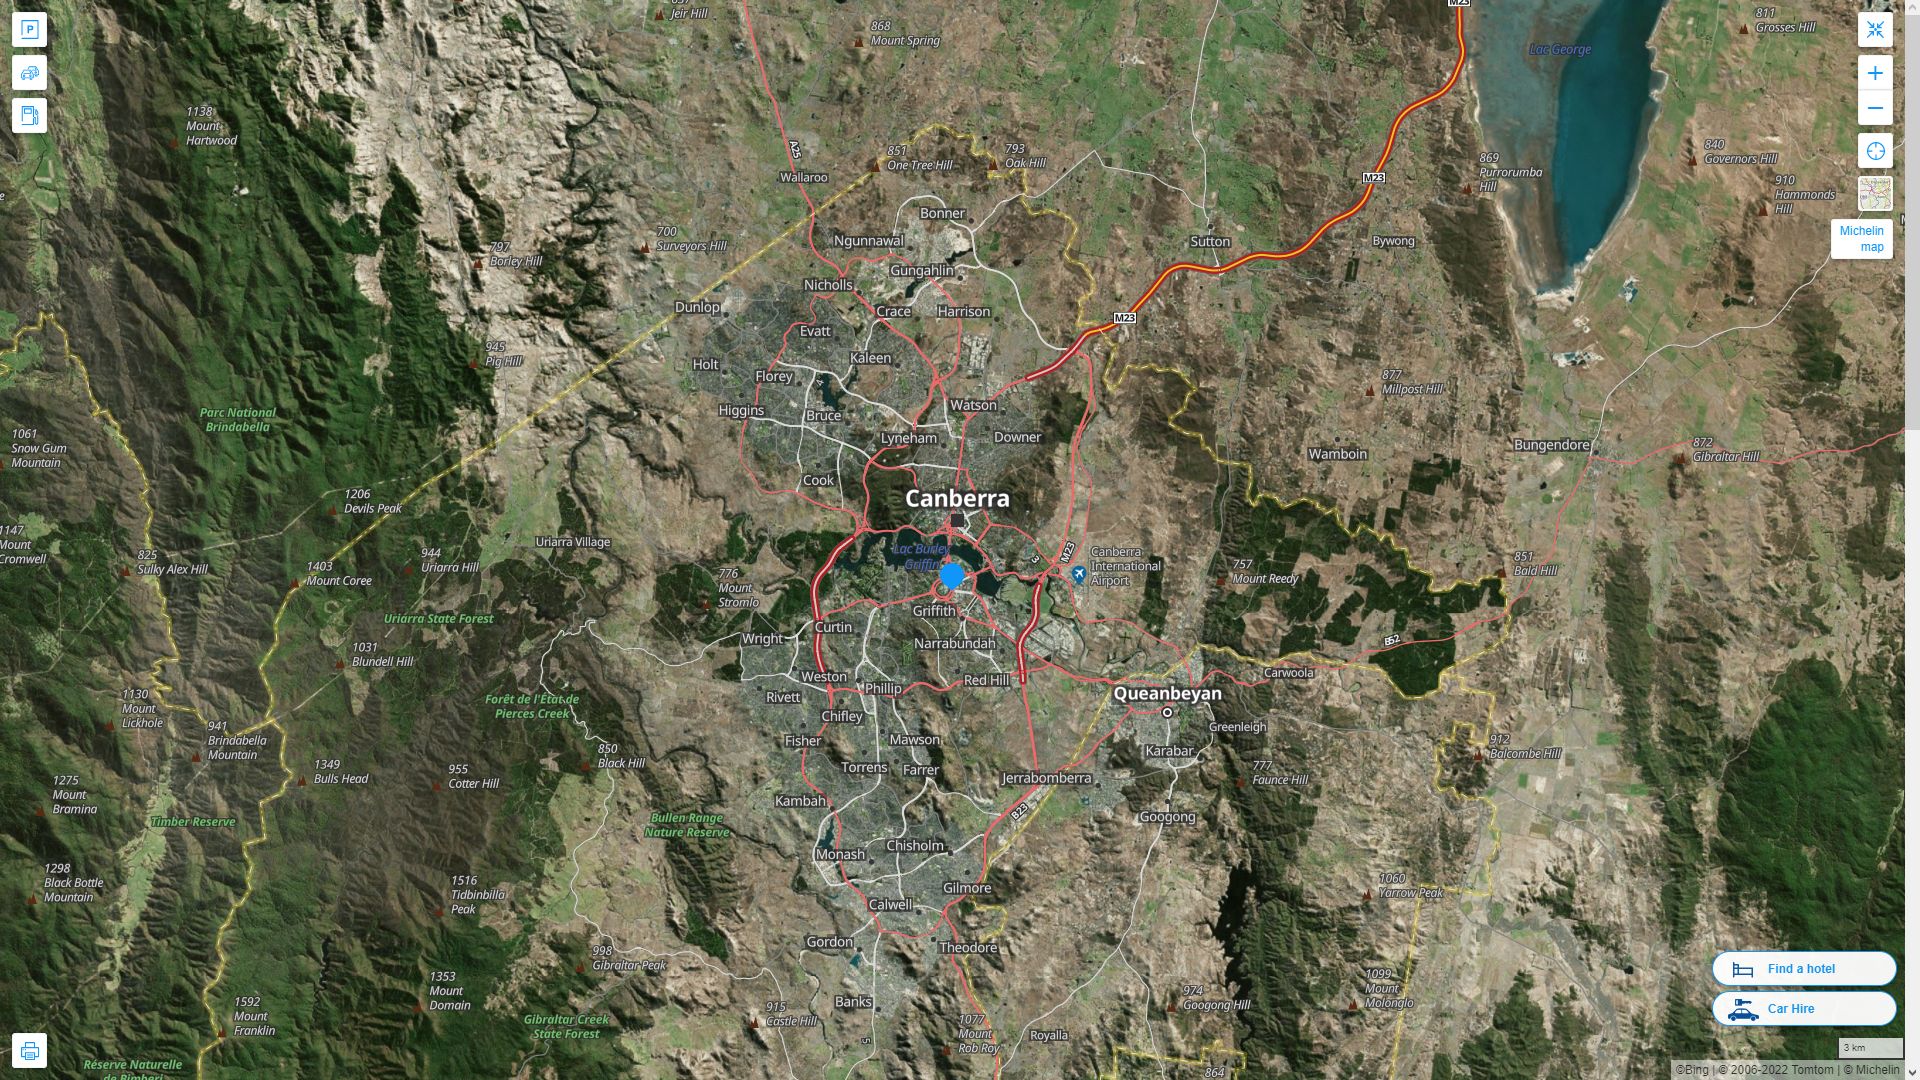 Canberra Highway and Road Map with Satellite View